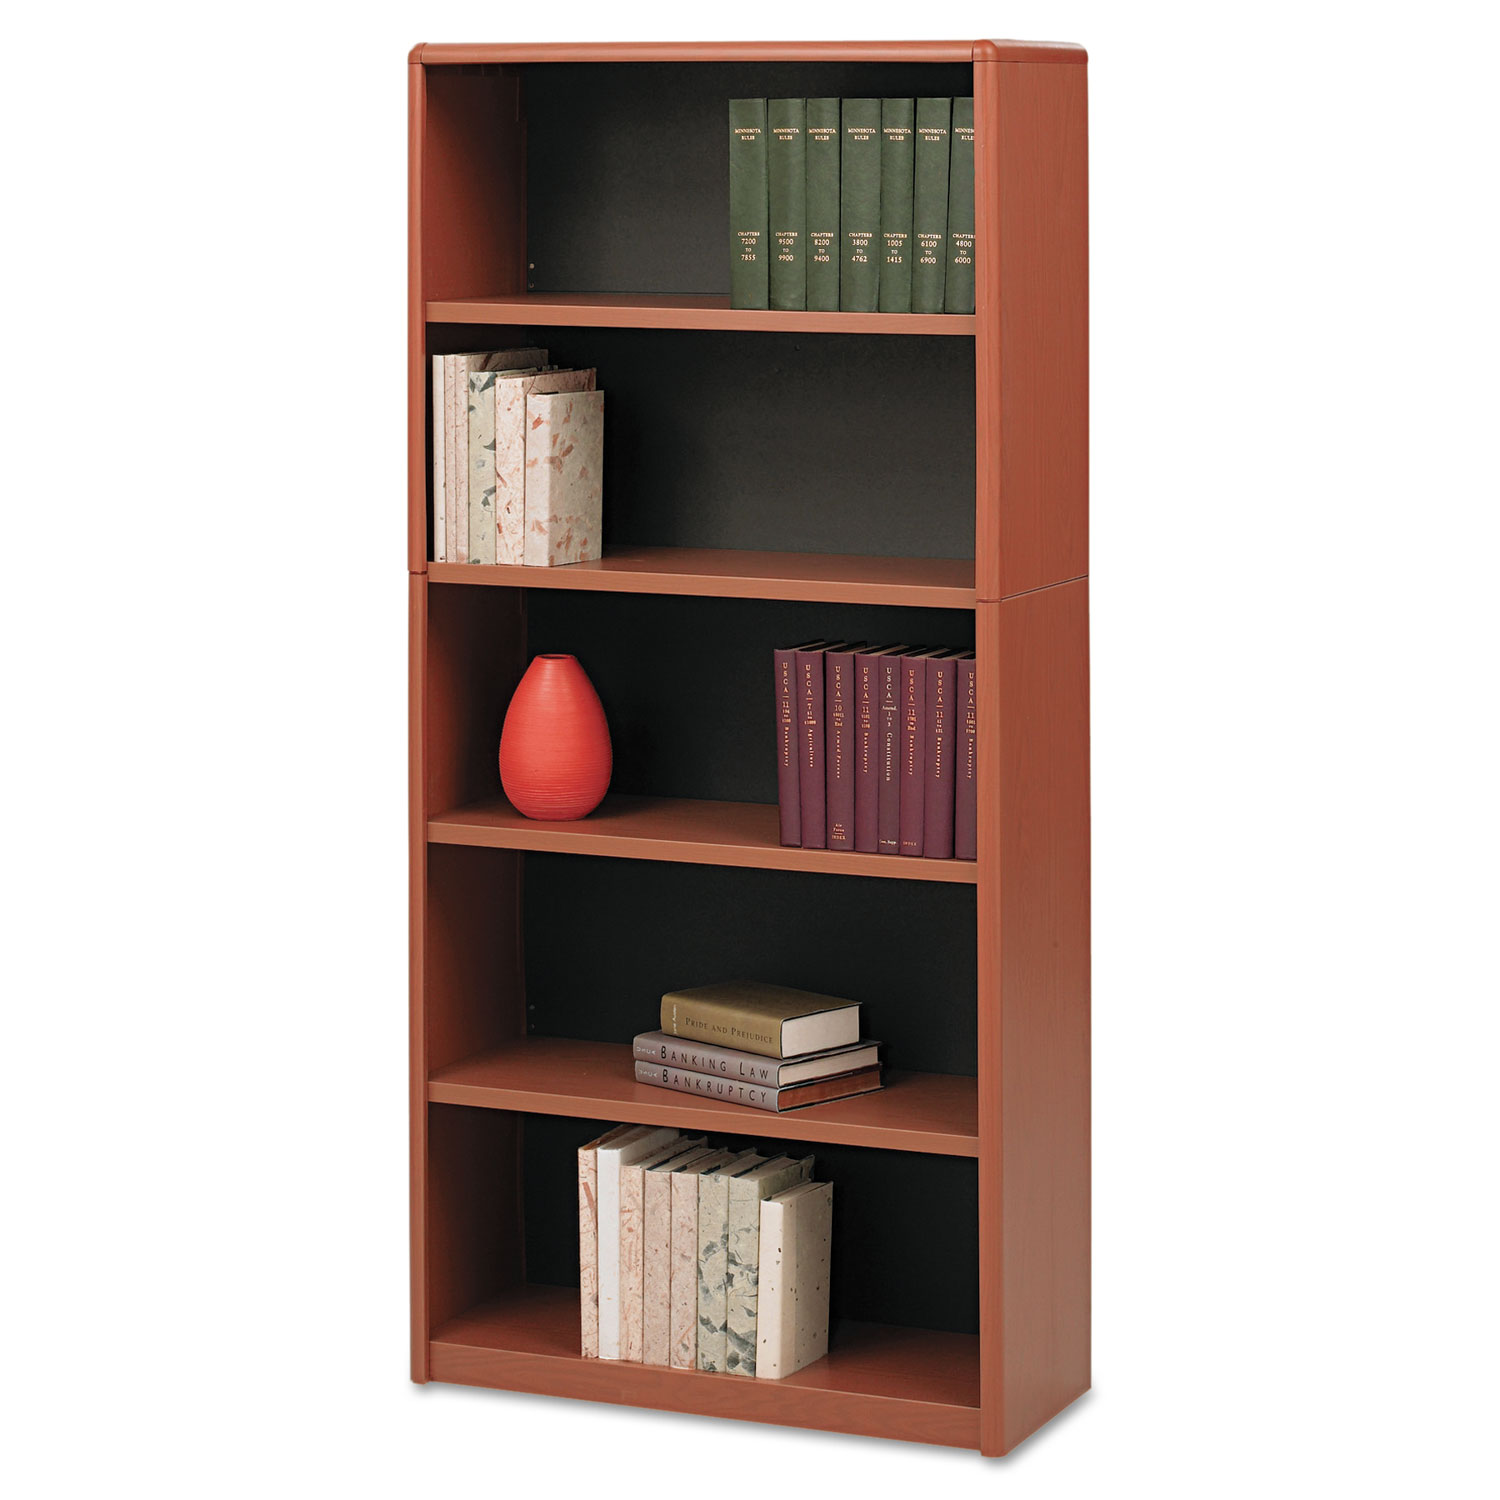  Safco 7173CY Value Mate Series Metal Bookcase, Five-Shelf, 31-3/4w x 13-1/2d x 67h, Cherry (SAF7173CY) 